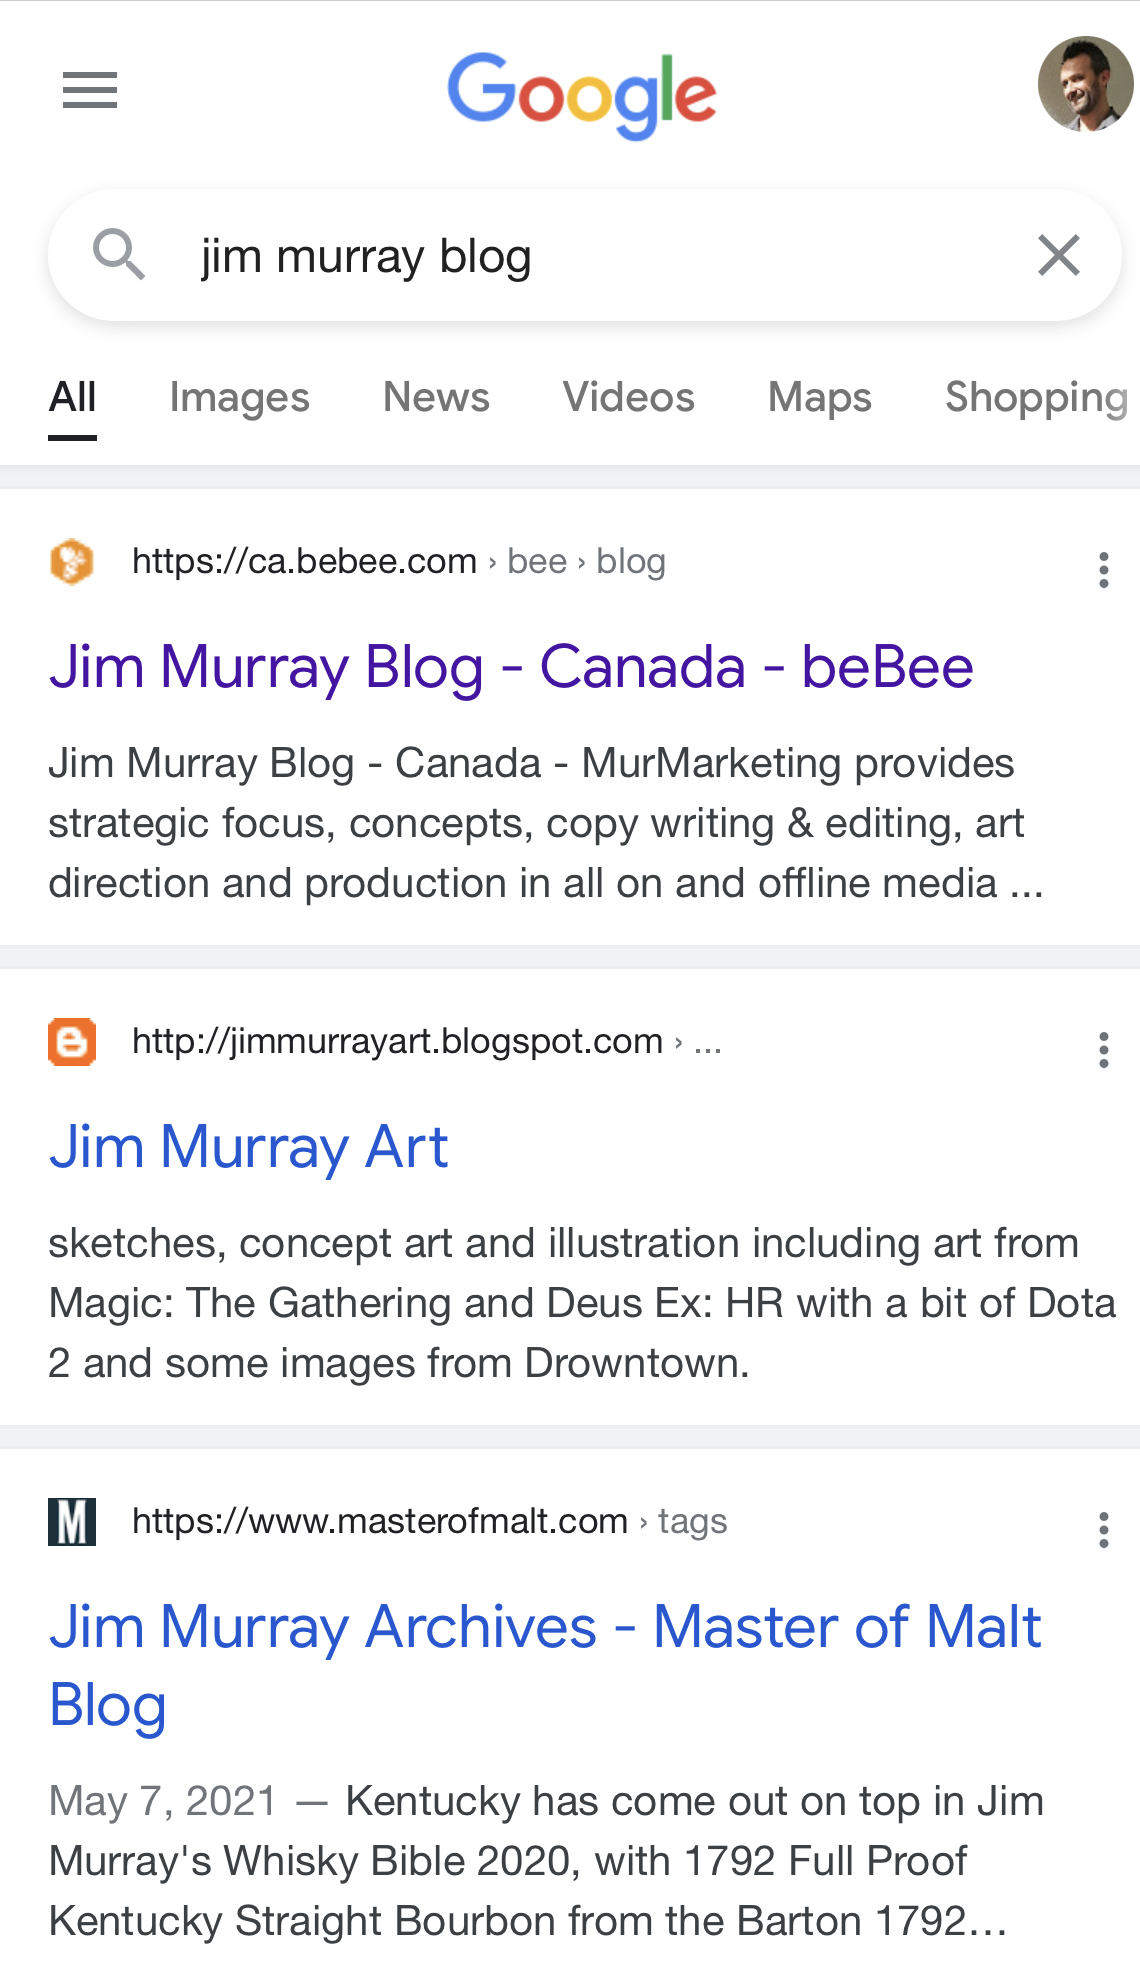 = Google >

Q_ jim murray blog X

All Images News Videos Maps Shopping

(J) https://ca.bebee.com > bee > blog

Jim Murray Blog - Canada - beBee

Jim Murray Blog - Canada - MurMarketing provides
strategic focus, concepts, copy writing & editing, art
direction and production in all on and offline media ...

B http://jimmurrayart.blogspot.com » ...

Jim Murray Art

sketches, concept art and illustration including art from
Magic: The Gathering and Deus Ex: HR with a bit of Dota
2 and some images from Drowntown.

Il https://www.masterofmalt.com > tags

Jim Murray Archives - Master of Malt
Blog
May 7, 2021 — Kentucky has come out on top in Jim

Murray's Whisky Bible 2020, with 1792 Full Proof
Kentucky Straight Bourbon from the Barton 1792...